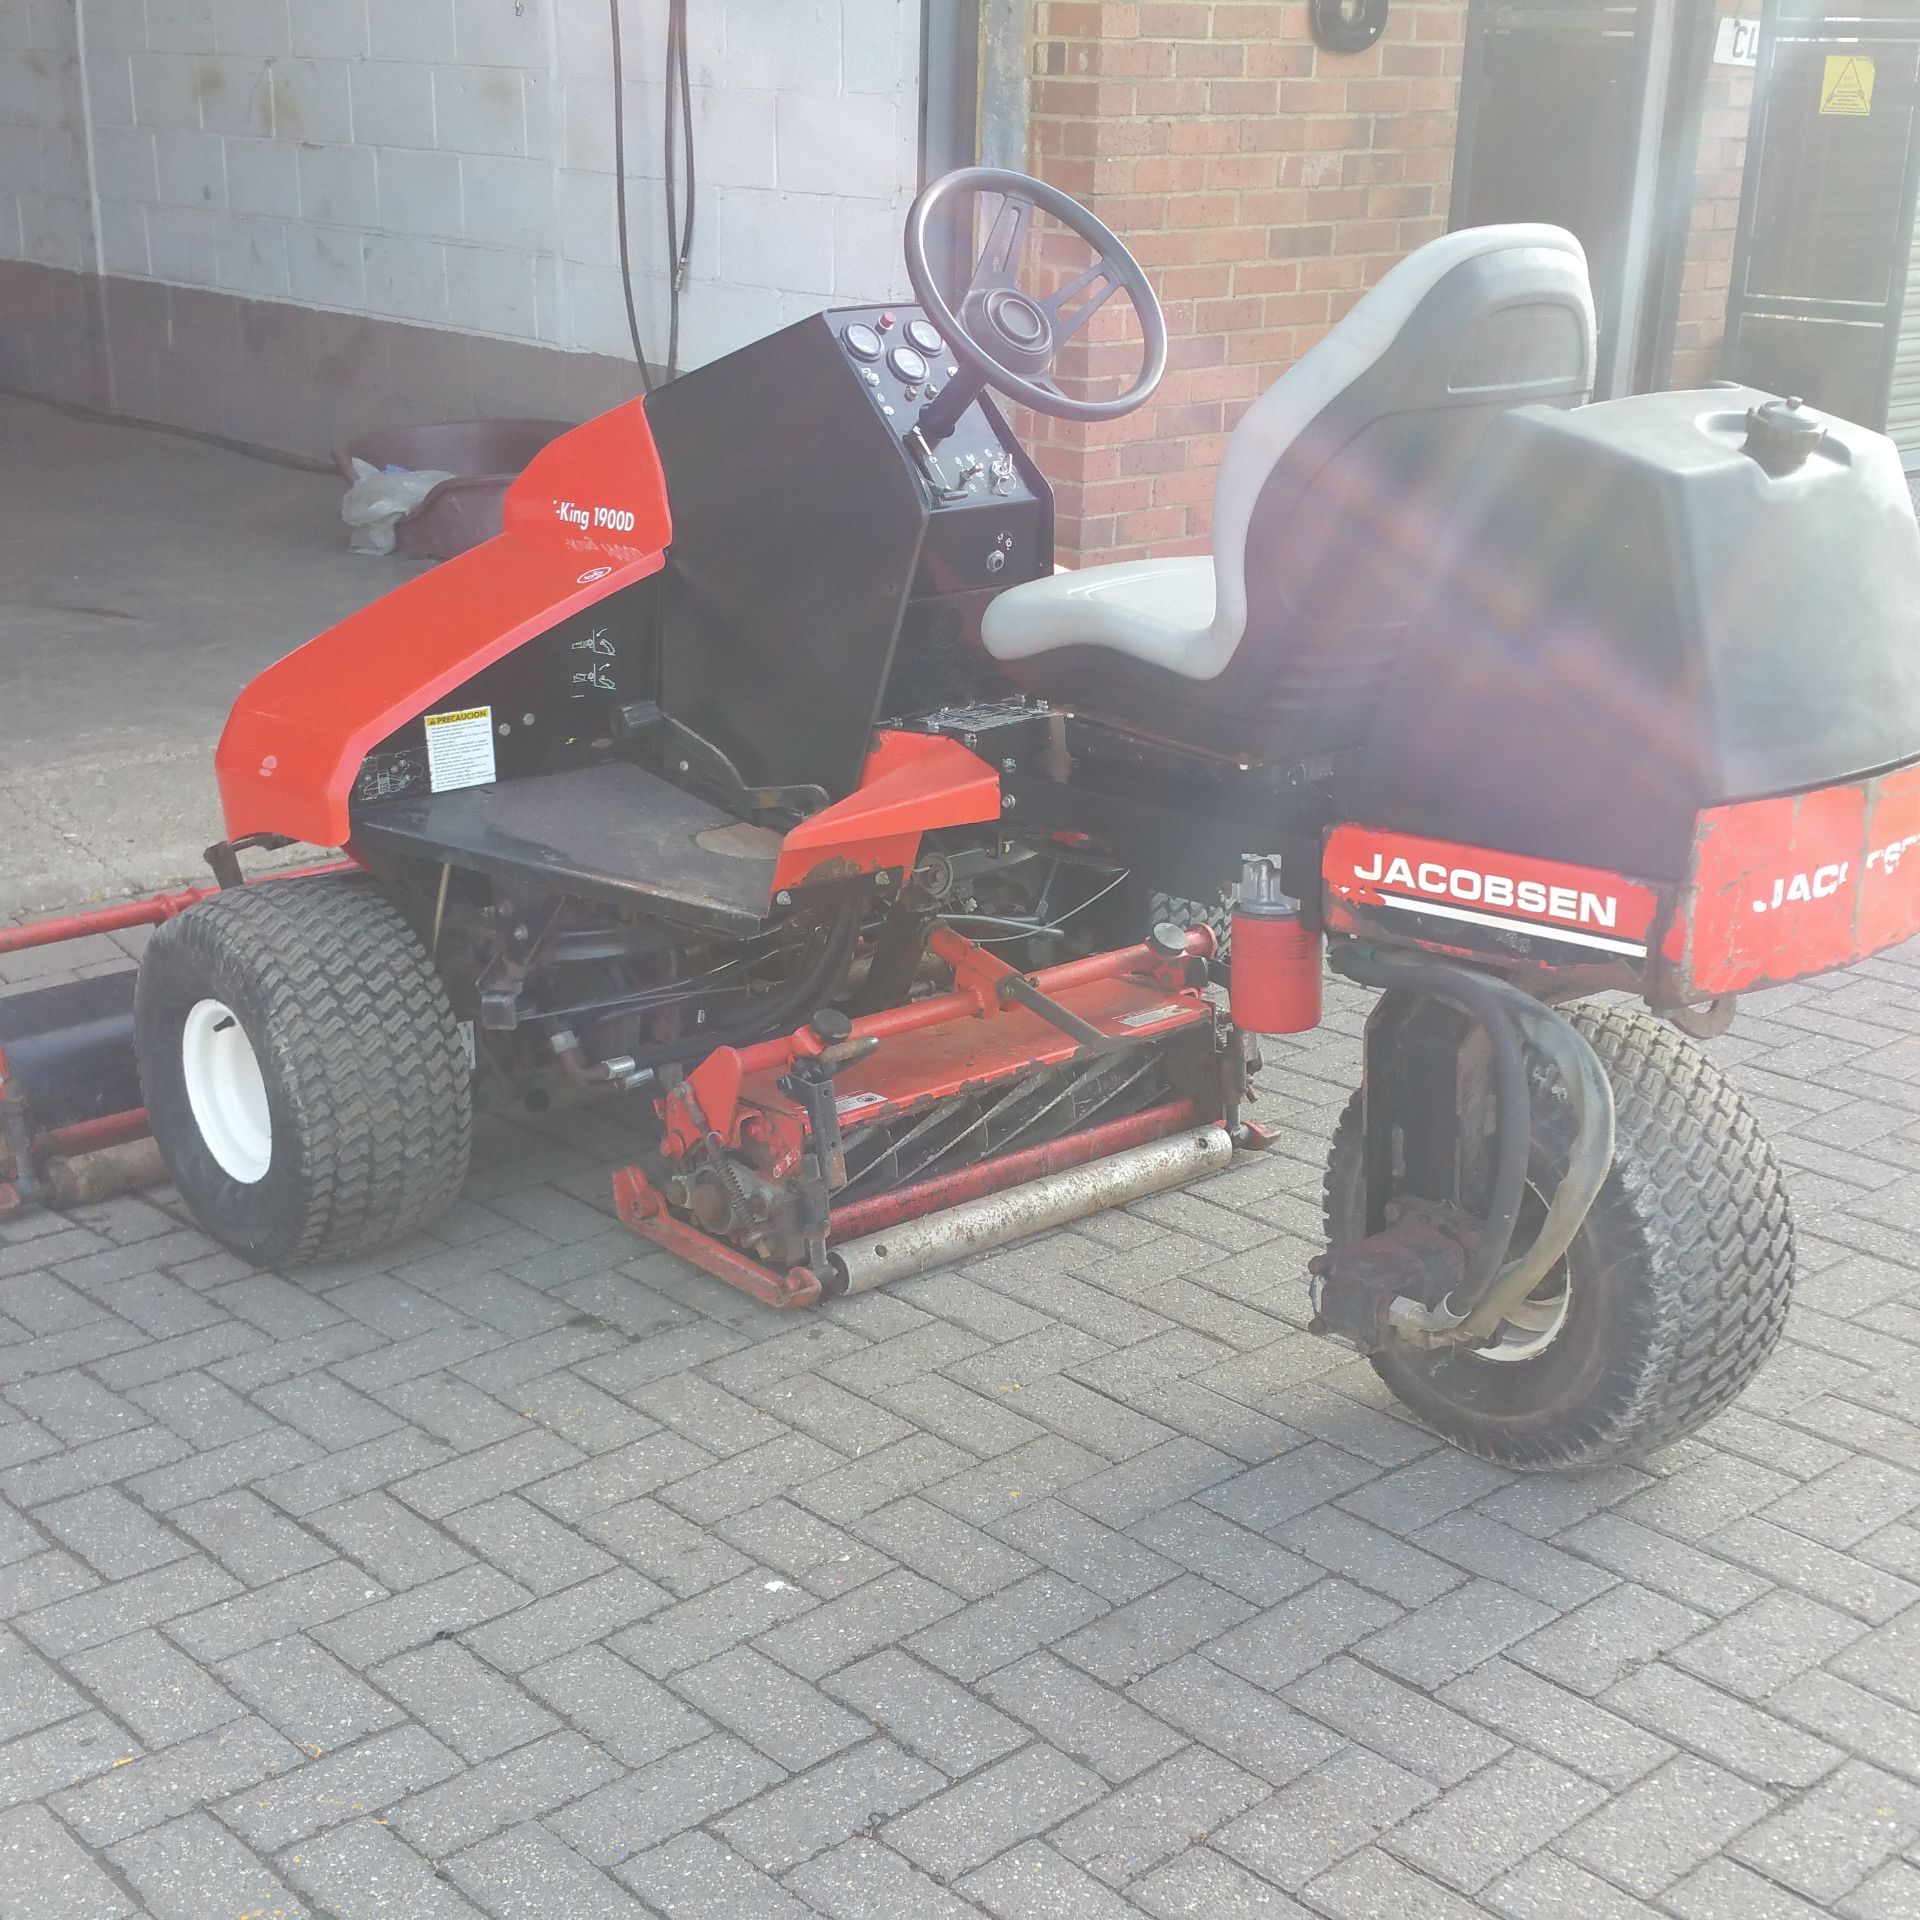 Jacobsen 1900D mower   Triple cylinder   3 cylinder diesel   Hydraulic lift   Hydrostatic drive - Image 4 of 5